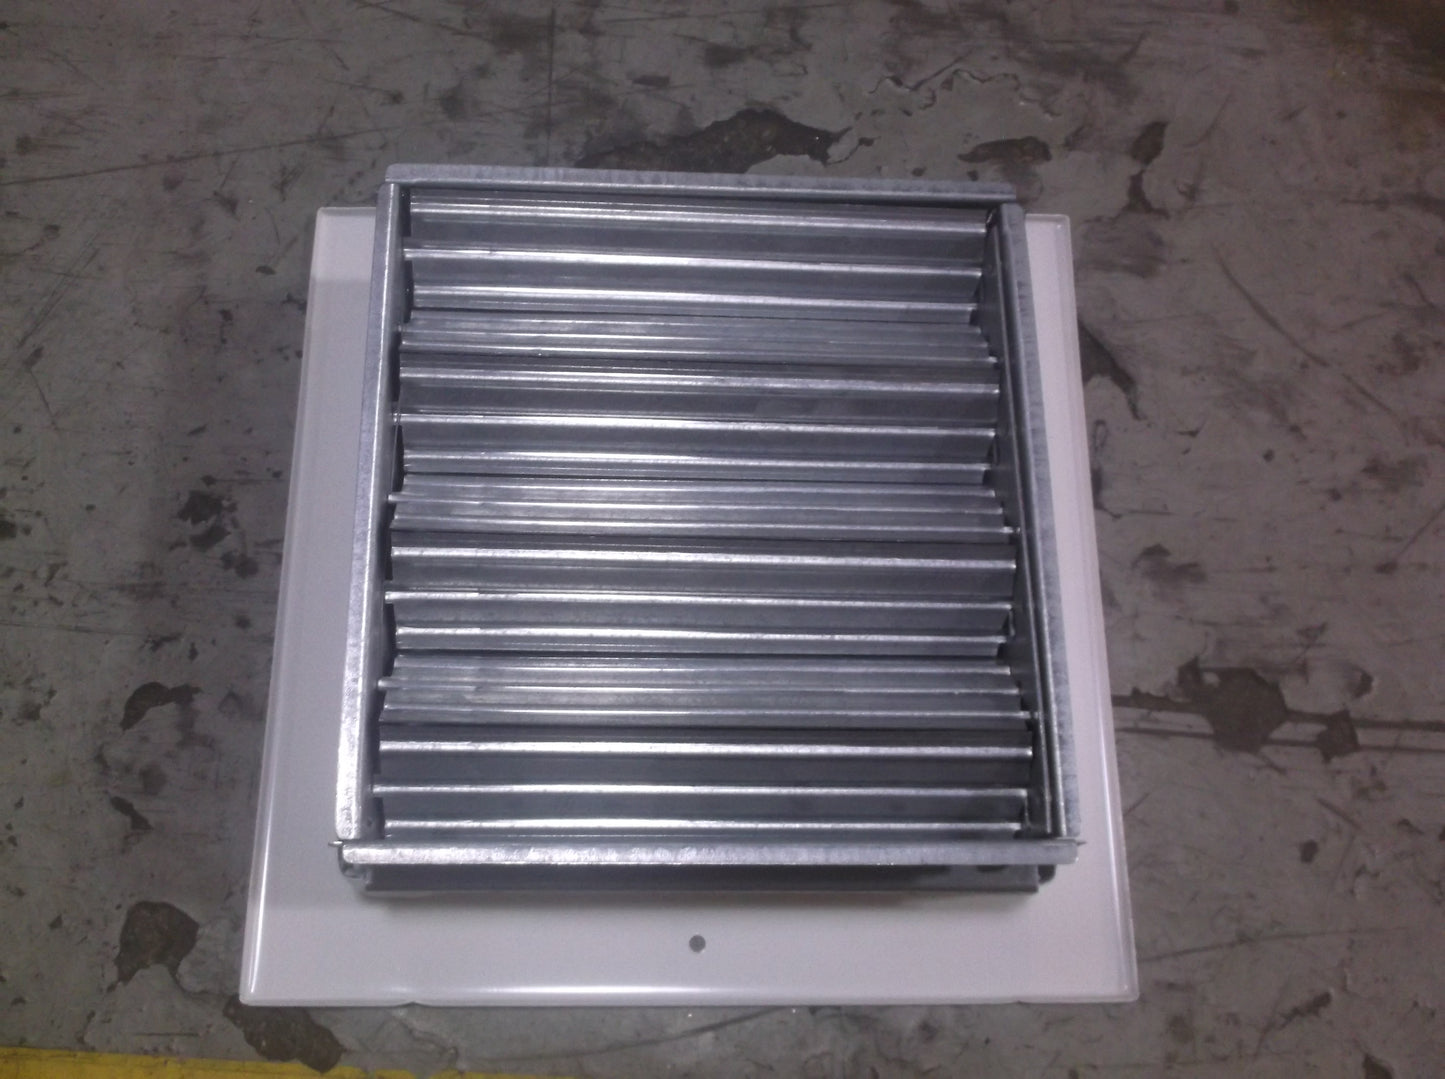 8 X 8" SUPPLY GRILLE  SURFACE MOUNT WITH DAMPER